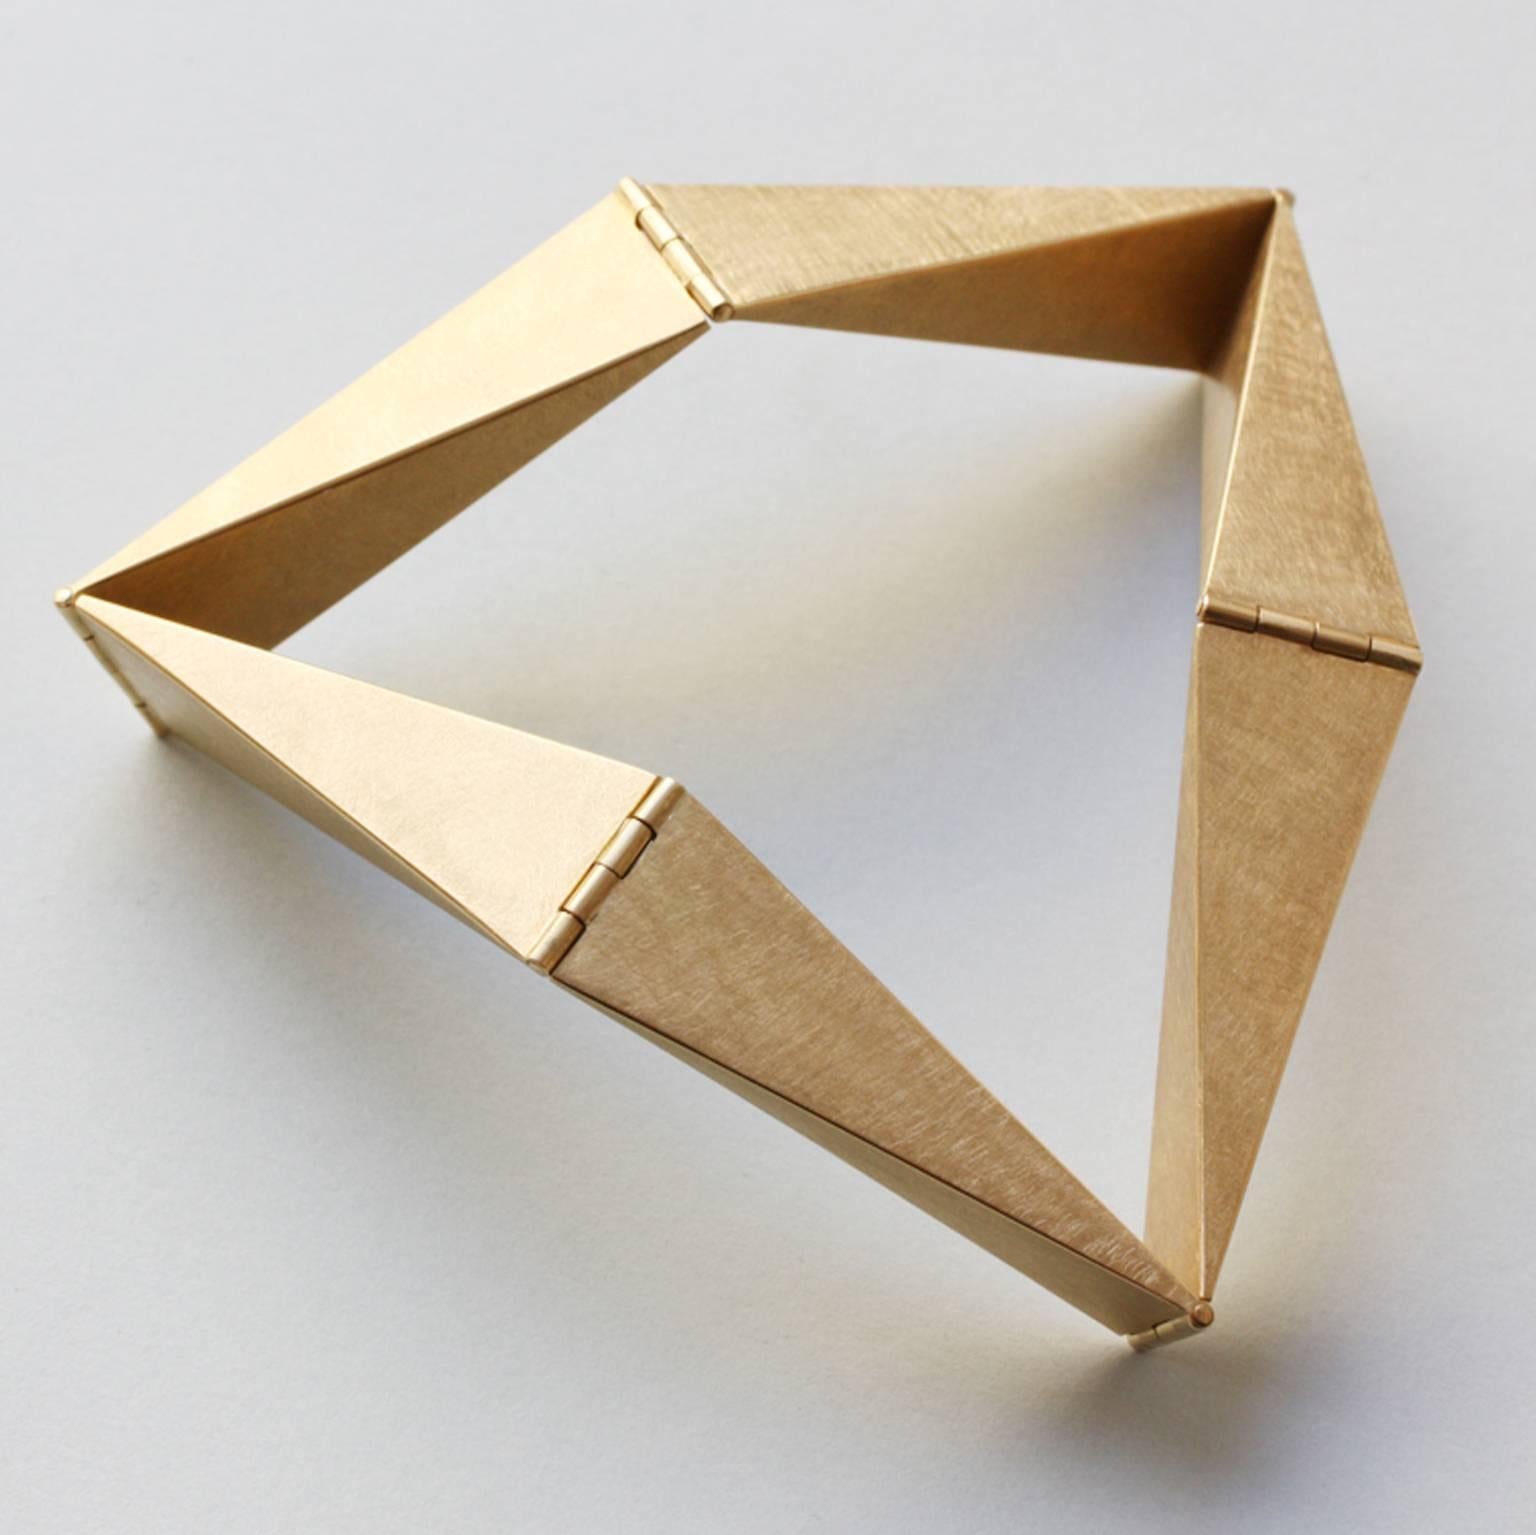 A geometrical 18 carat gold bracelet by Anne Roose Regenboog.

weight: 60 grams
size: very small